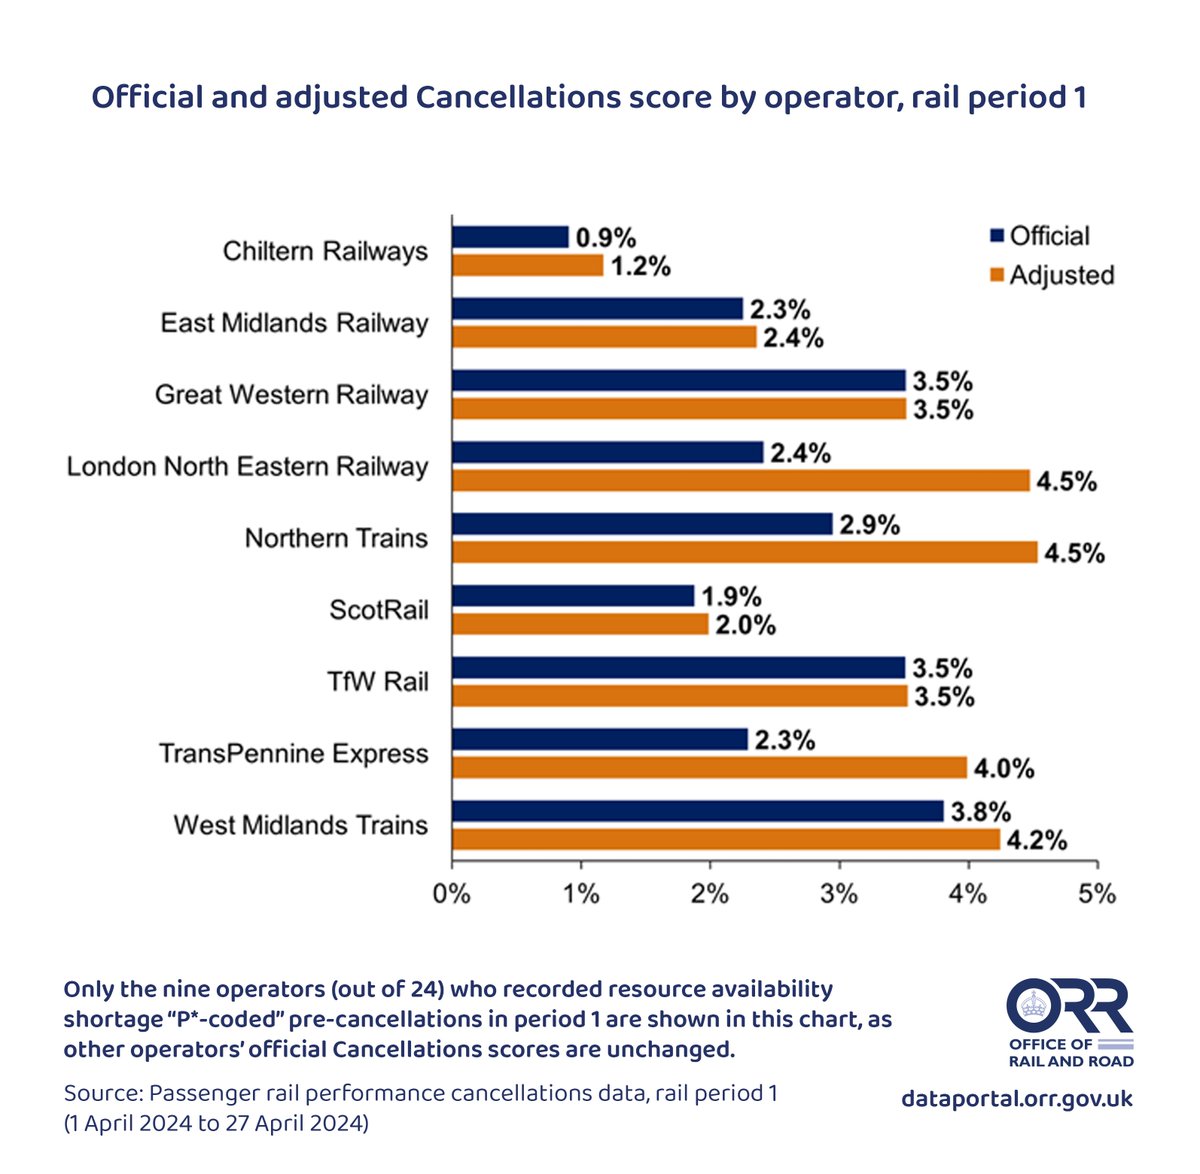 For the last rail period (1 Apr to 27 Apr), nine operators reported pre-cancelled (P-coded) services due to non-availability of staff or rolling stock. Only operators with adjusted cancellations scores are shown in the chart. 📊➡ dataportal.orr.gov.uk/statistics/per…